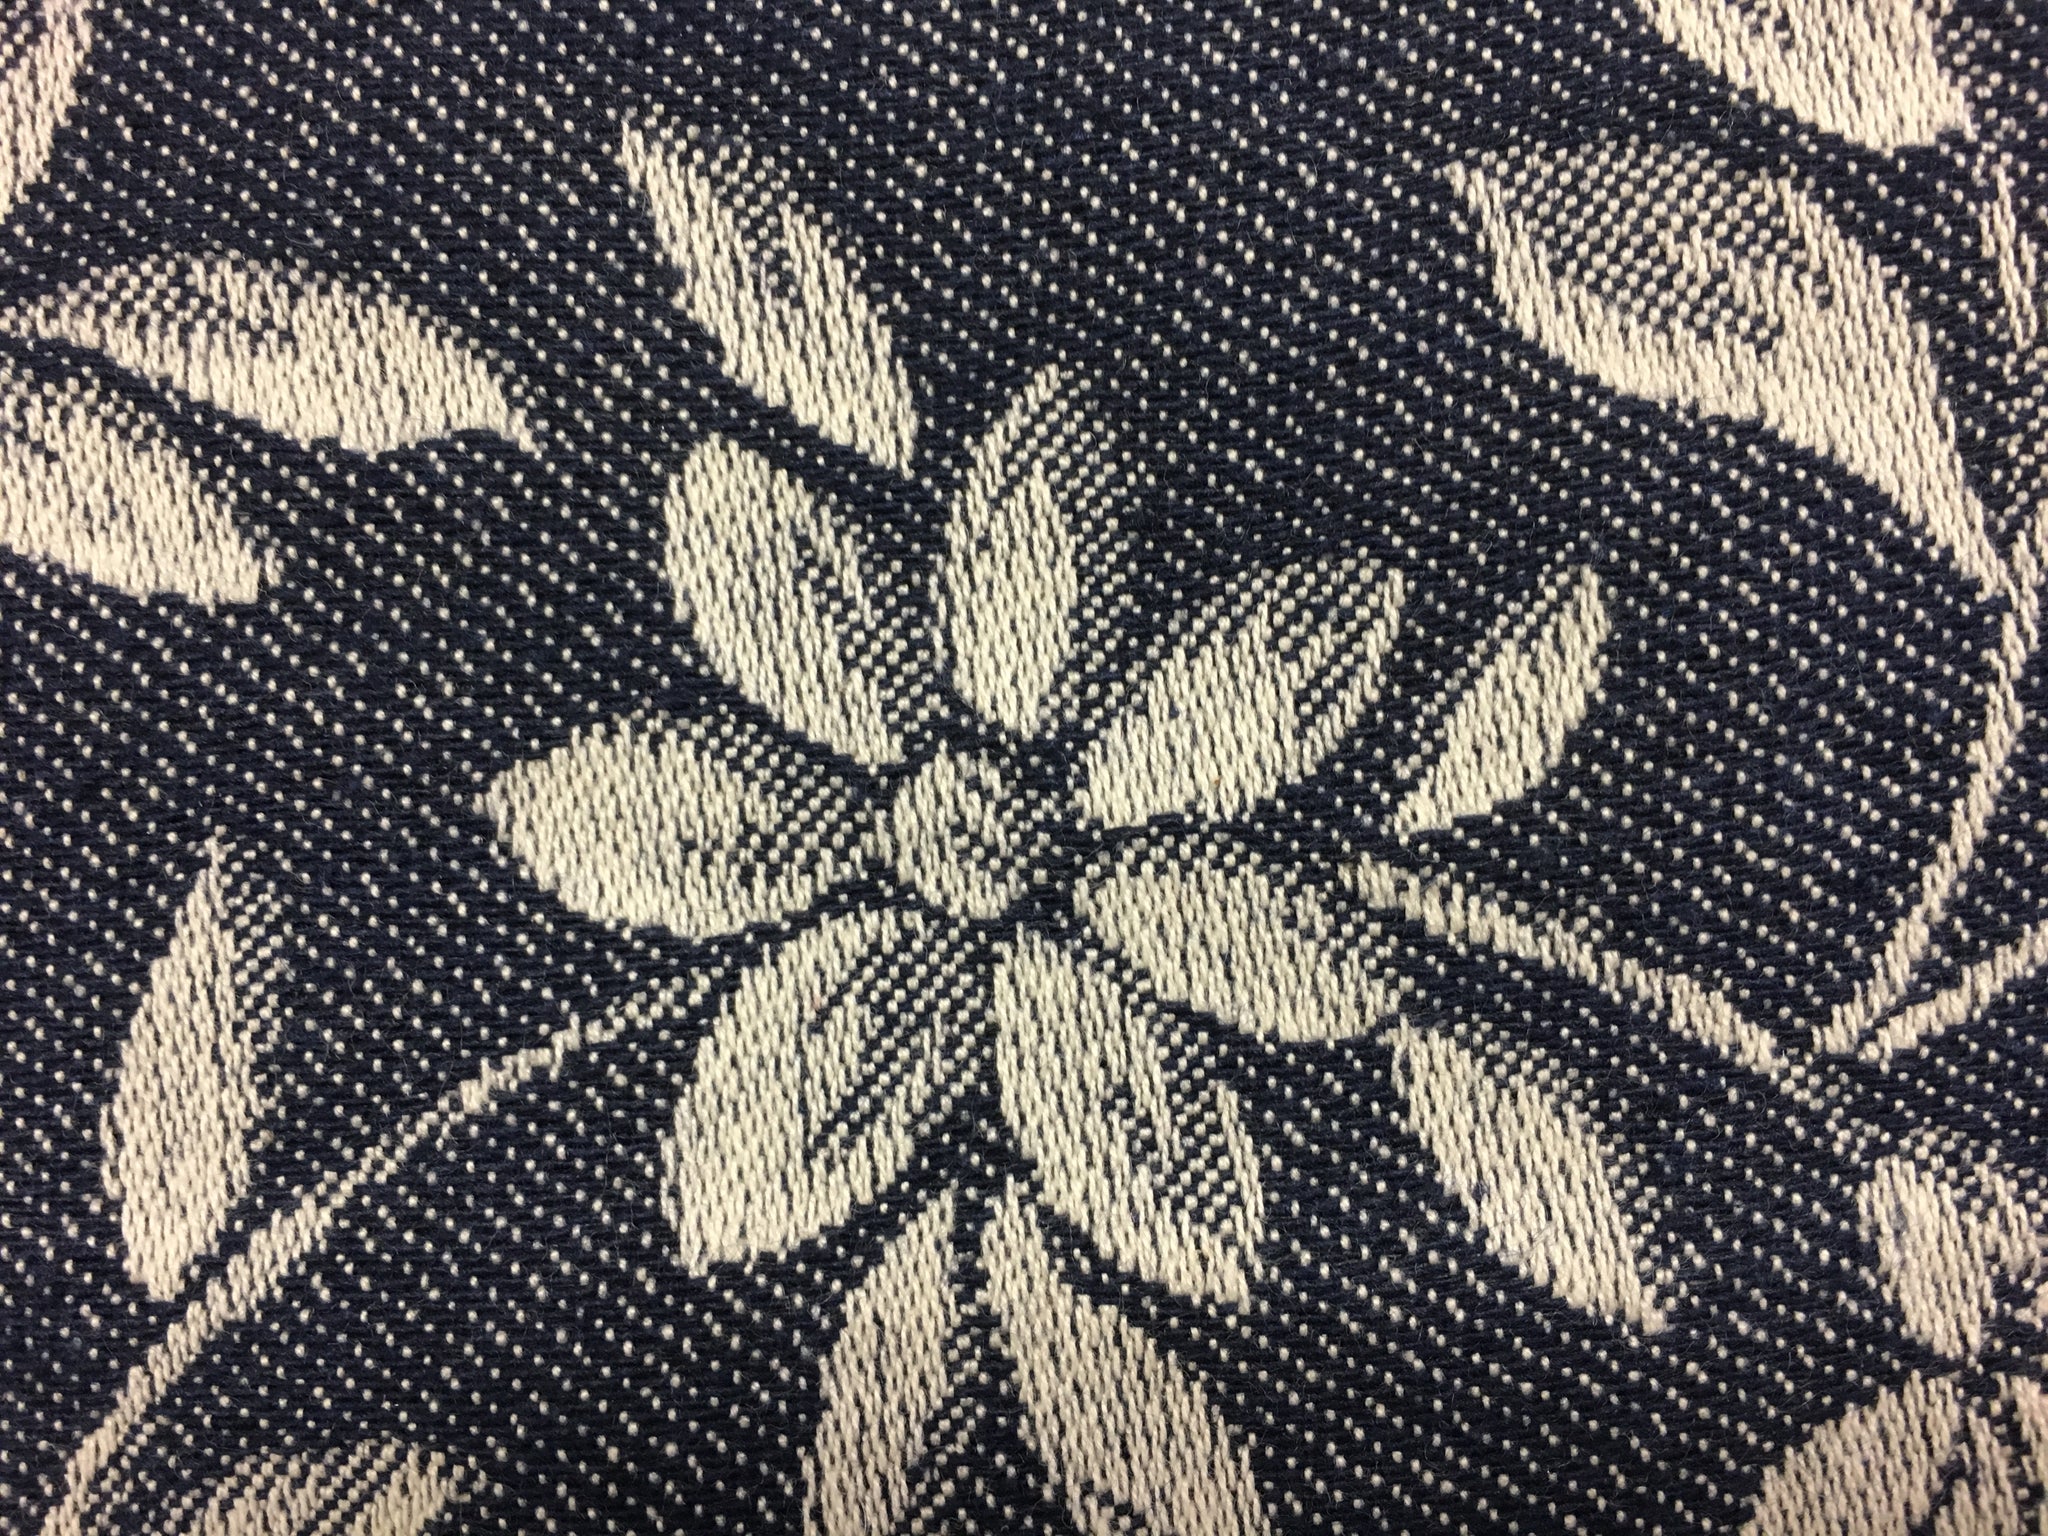 Linnisbrook Lapis Blue and White Floral Drapery Fabric Upholstery Fabric  Large Floral Pattern Fabric by the Yard 